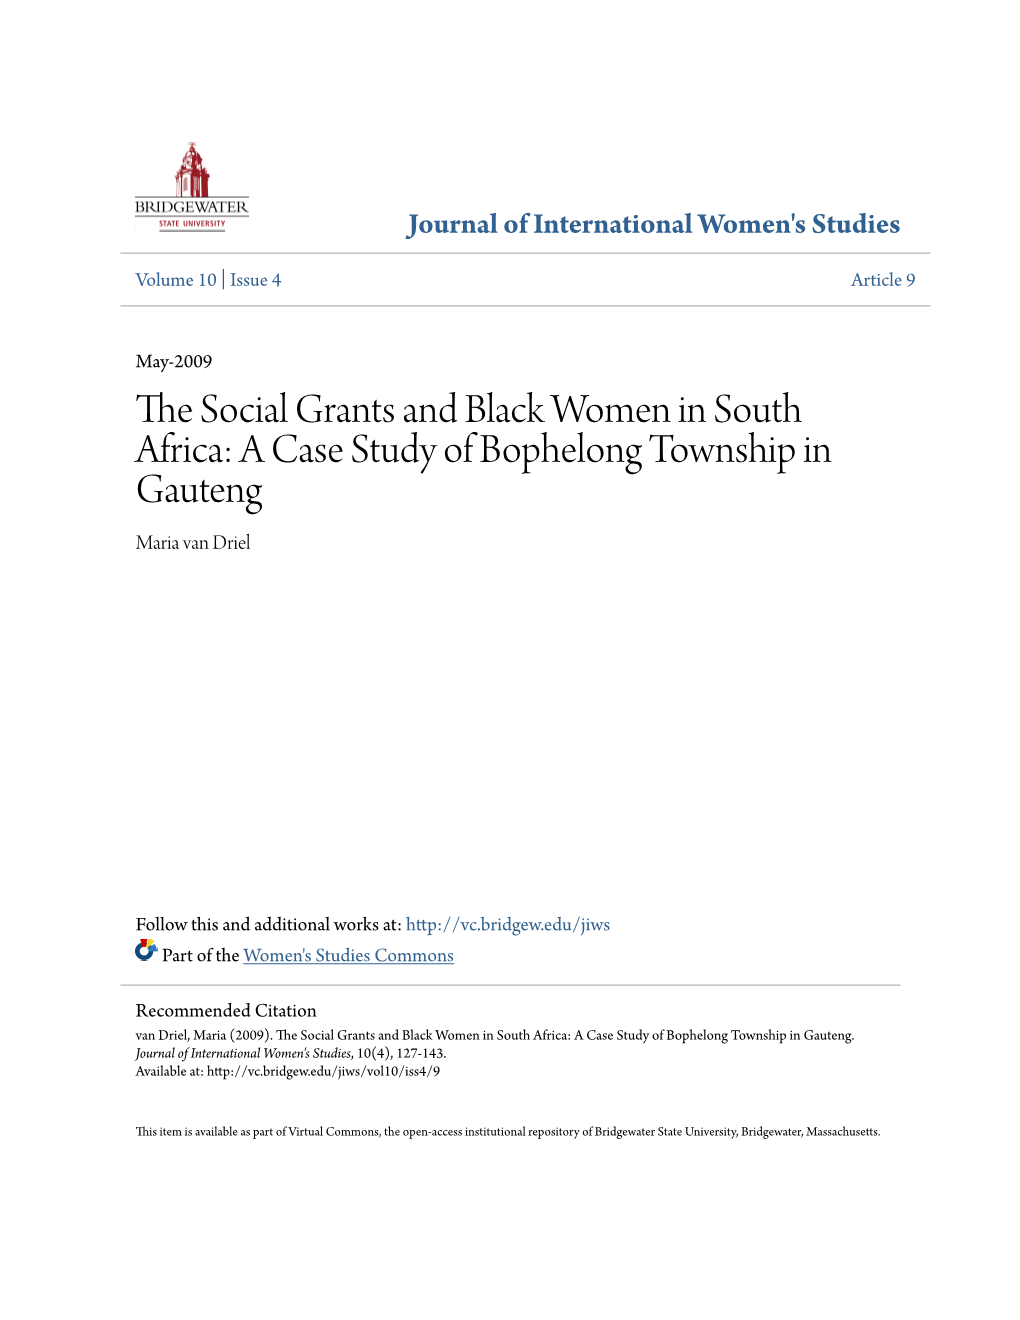 The Social Grants and Black Women in South Africai: a Case Study of Bophelongii Township in Gauteng